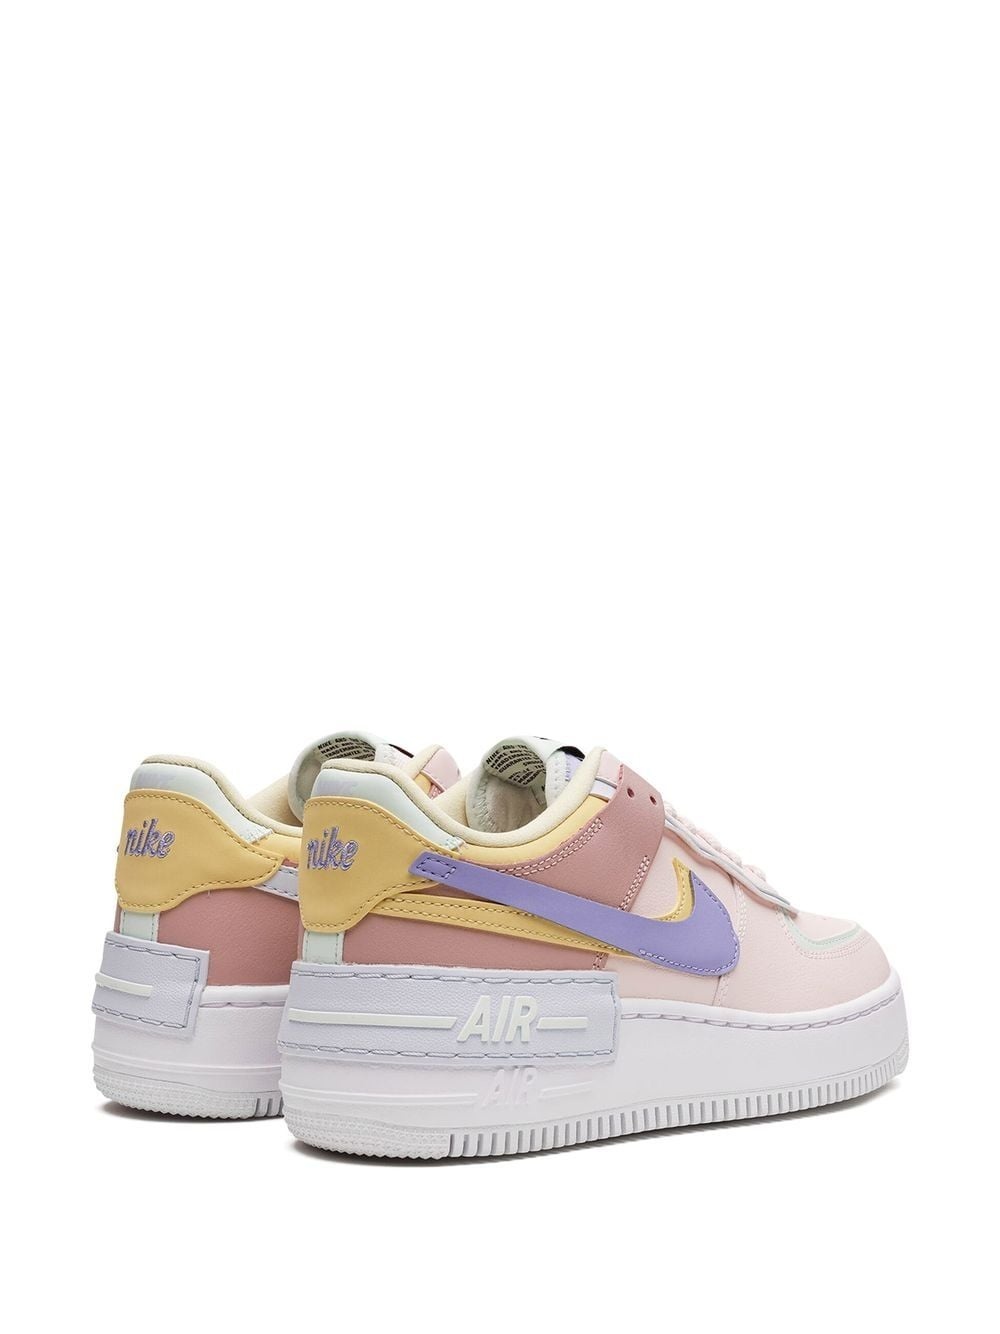 Air Force 1 Low Shadow "Soft Pink" sneakers - 3